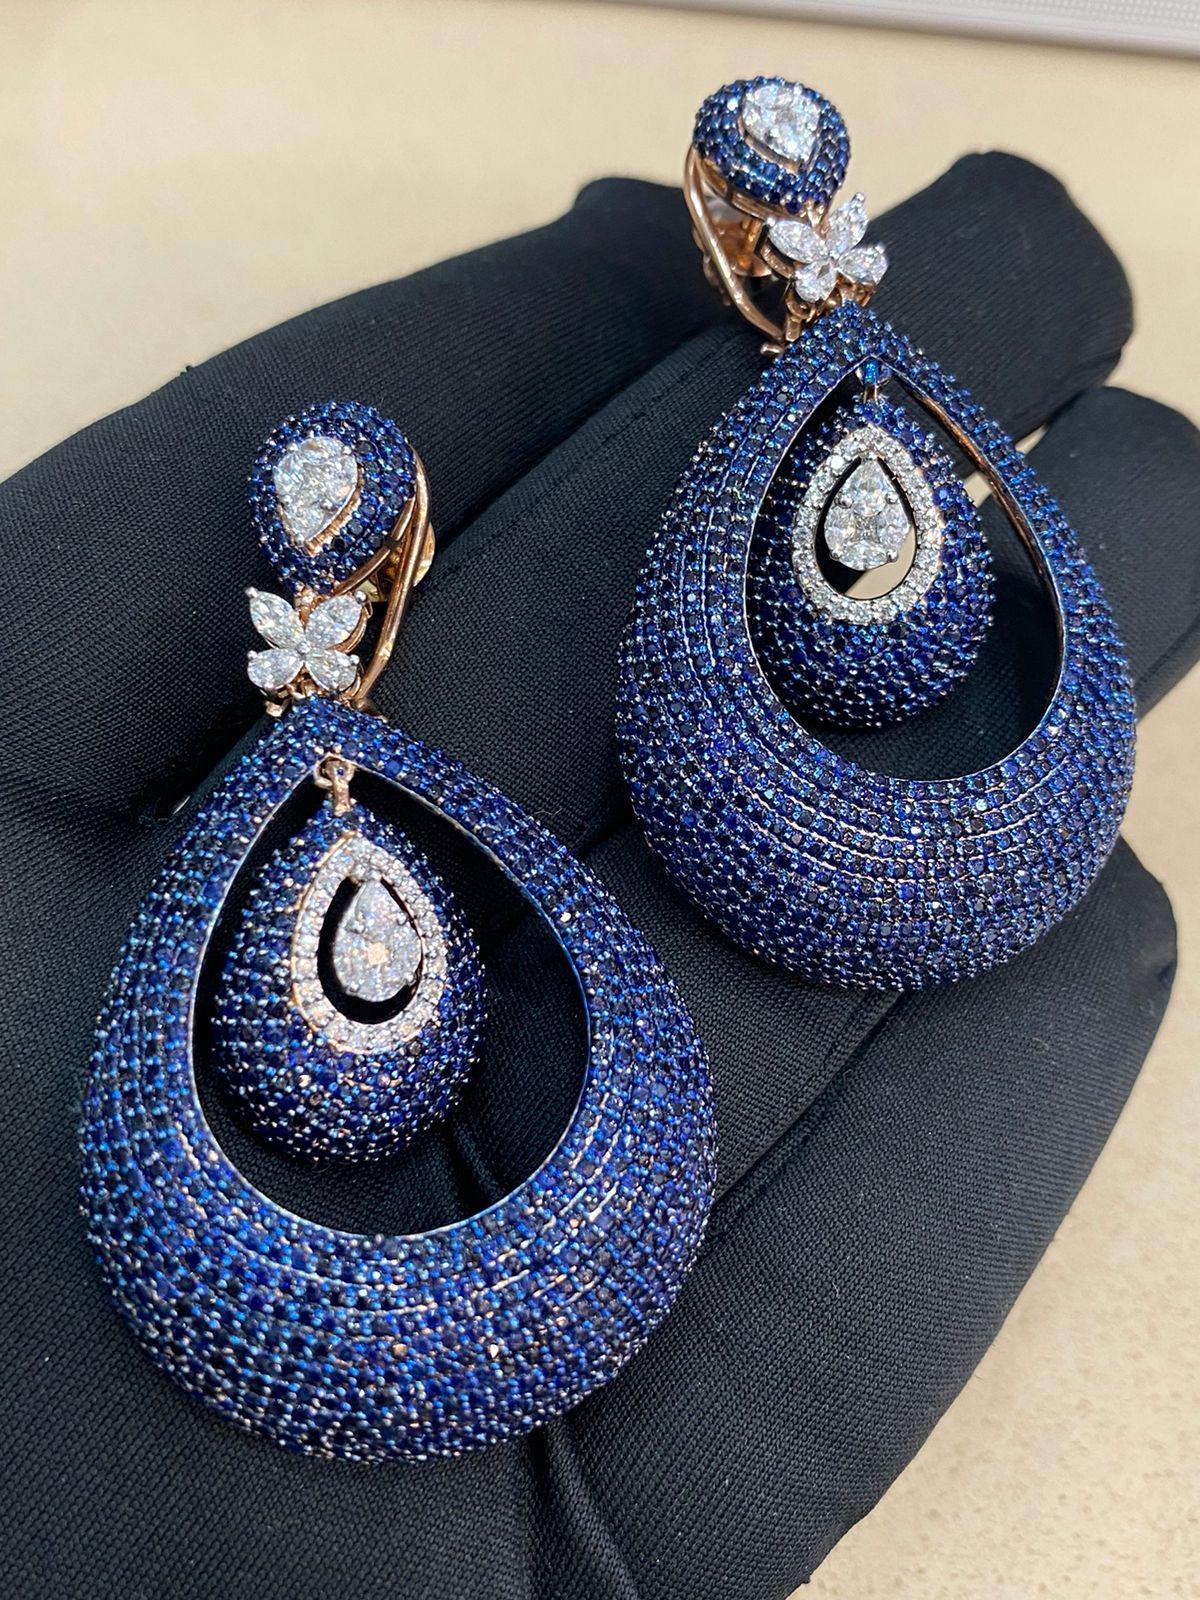 These exquisite dangle earrings showcase 1.40 Carats of Marquise, Pear, Princess, and Round Diamonds alongside 18.90 Carats of Blue Sapphires, all set in 14K Rose Gold. An ideal present for any occasion!

Specifications : 

Width : 34 MM
Length : 61